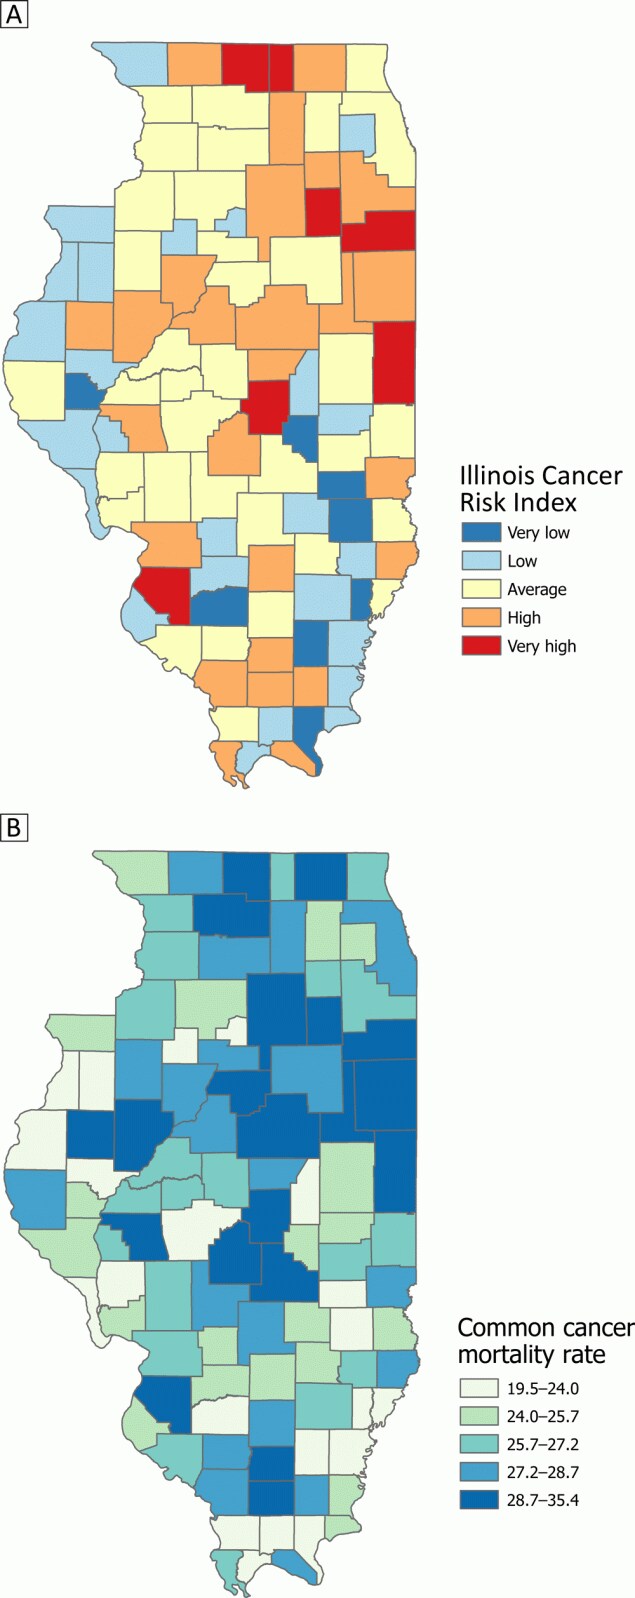 Distribution by county of risk of the 4 most common cancers — lung, colorectal, breast, and prostate — in Illinois. Map A displays risk by the Illinois Cancer Risk Index (ICRI) for each county. Higher risk counties were located in the east-central portion of the state, with some also located in the far northern and southern portions of the state. Map B plots the common cancer mortality rate (CCMR), 2014–2018, for each county in Illinois. Counties in the 2 highest CCMR quintiles were located in the northeast and southern parts of Illinois, with some also located in the central portion of the state.